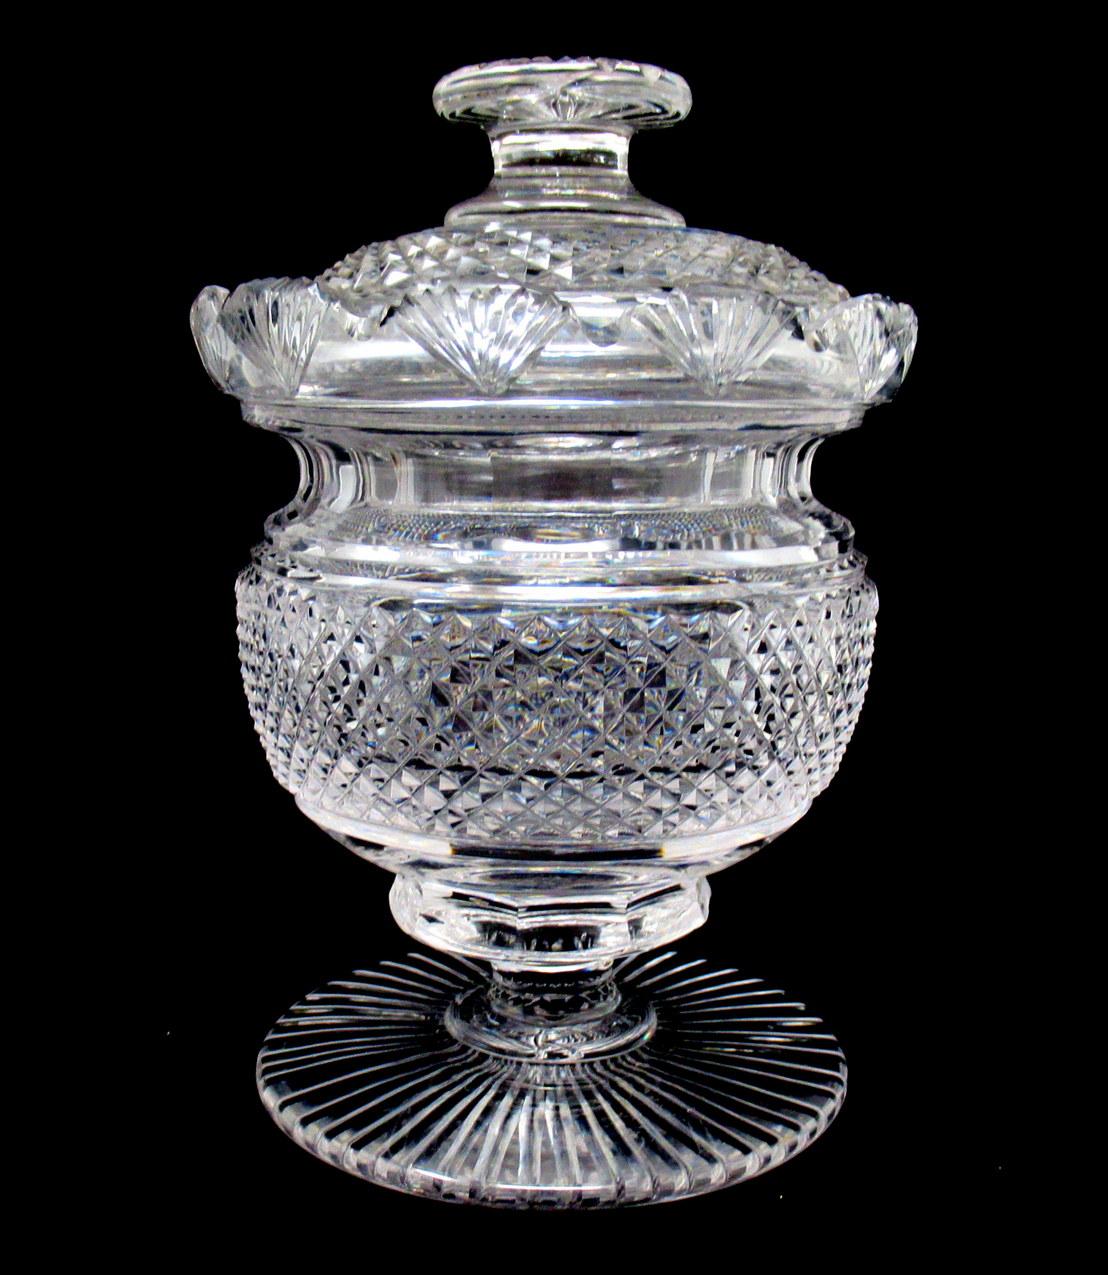 Stunning and extremely rare georgian Irish heavy gauge hand cut crystal footed lidded vase or centerpiece of bulbous circular outline raised on a plain socle above a circular fan cut flat base, of outstanding quality and condition. Circa 1800 -